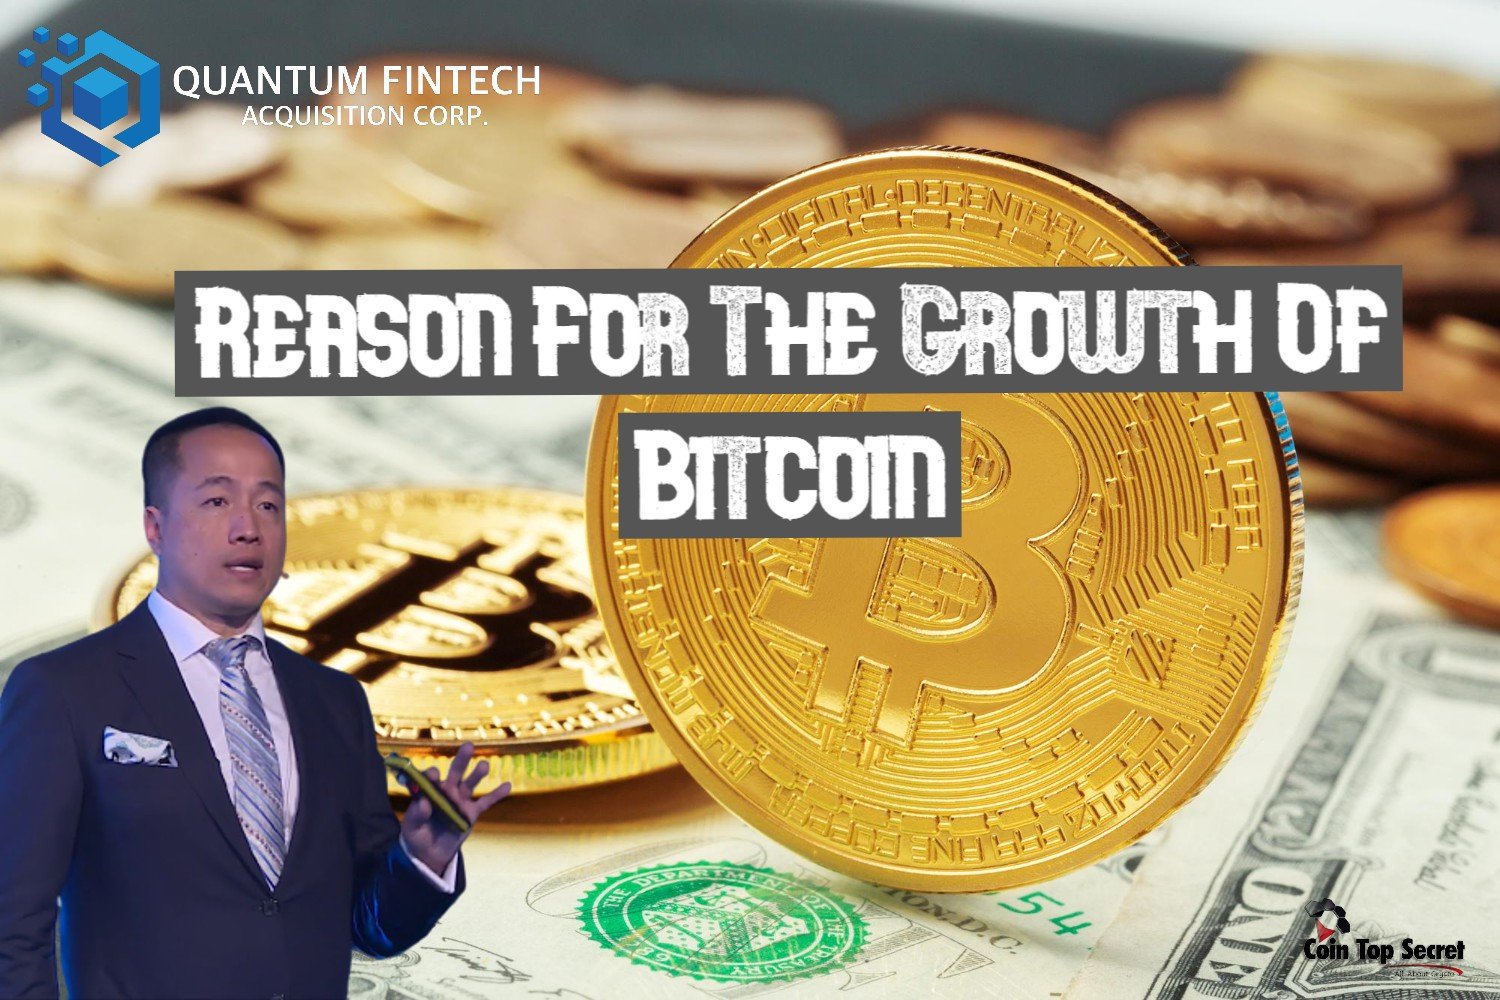 The Founder Of Quantum Fintech Group Named The Reason For ...